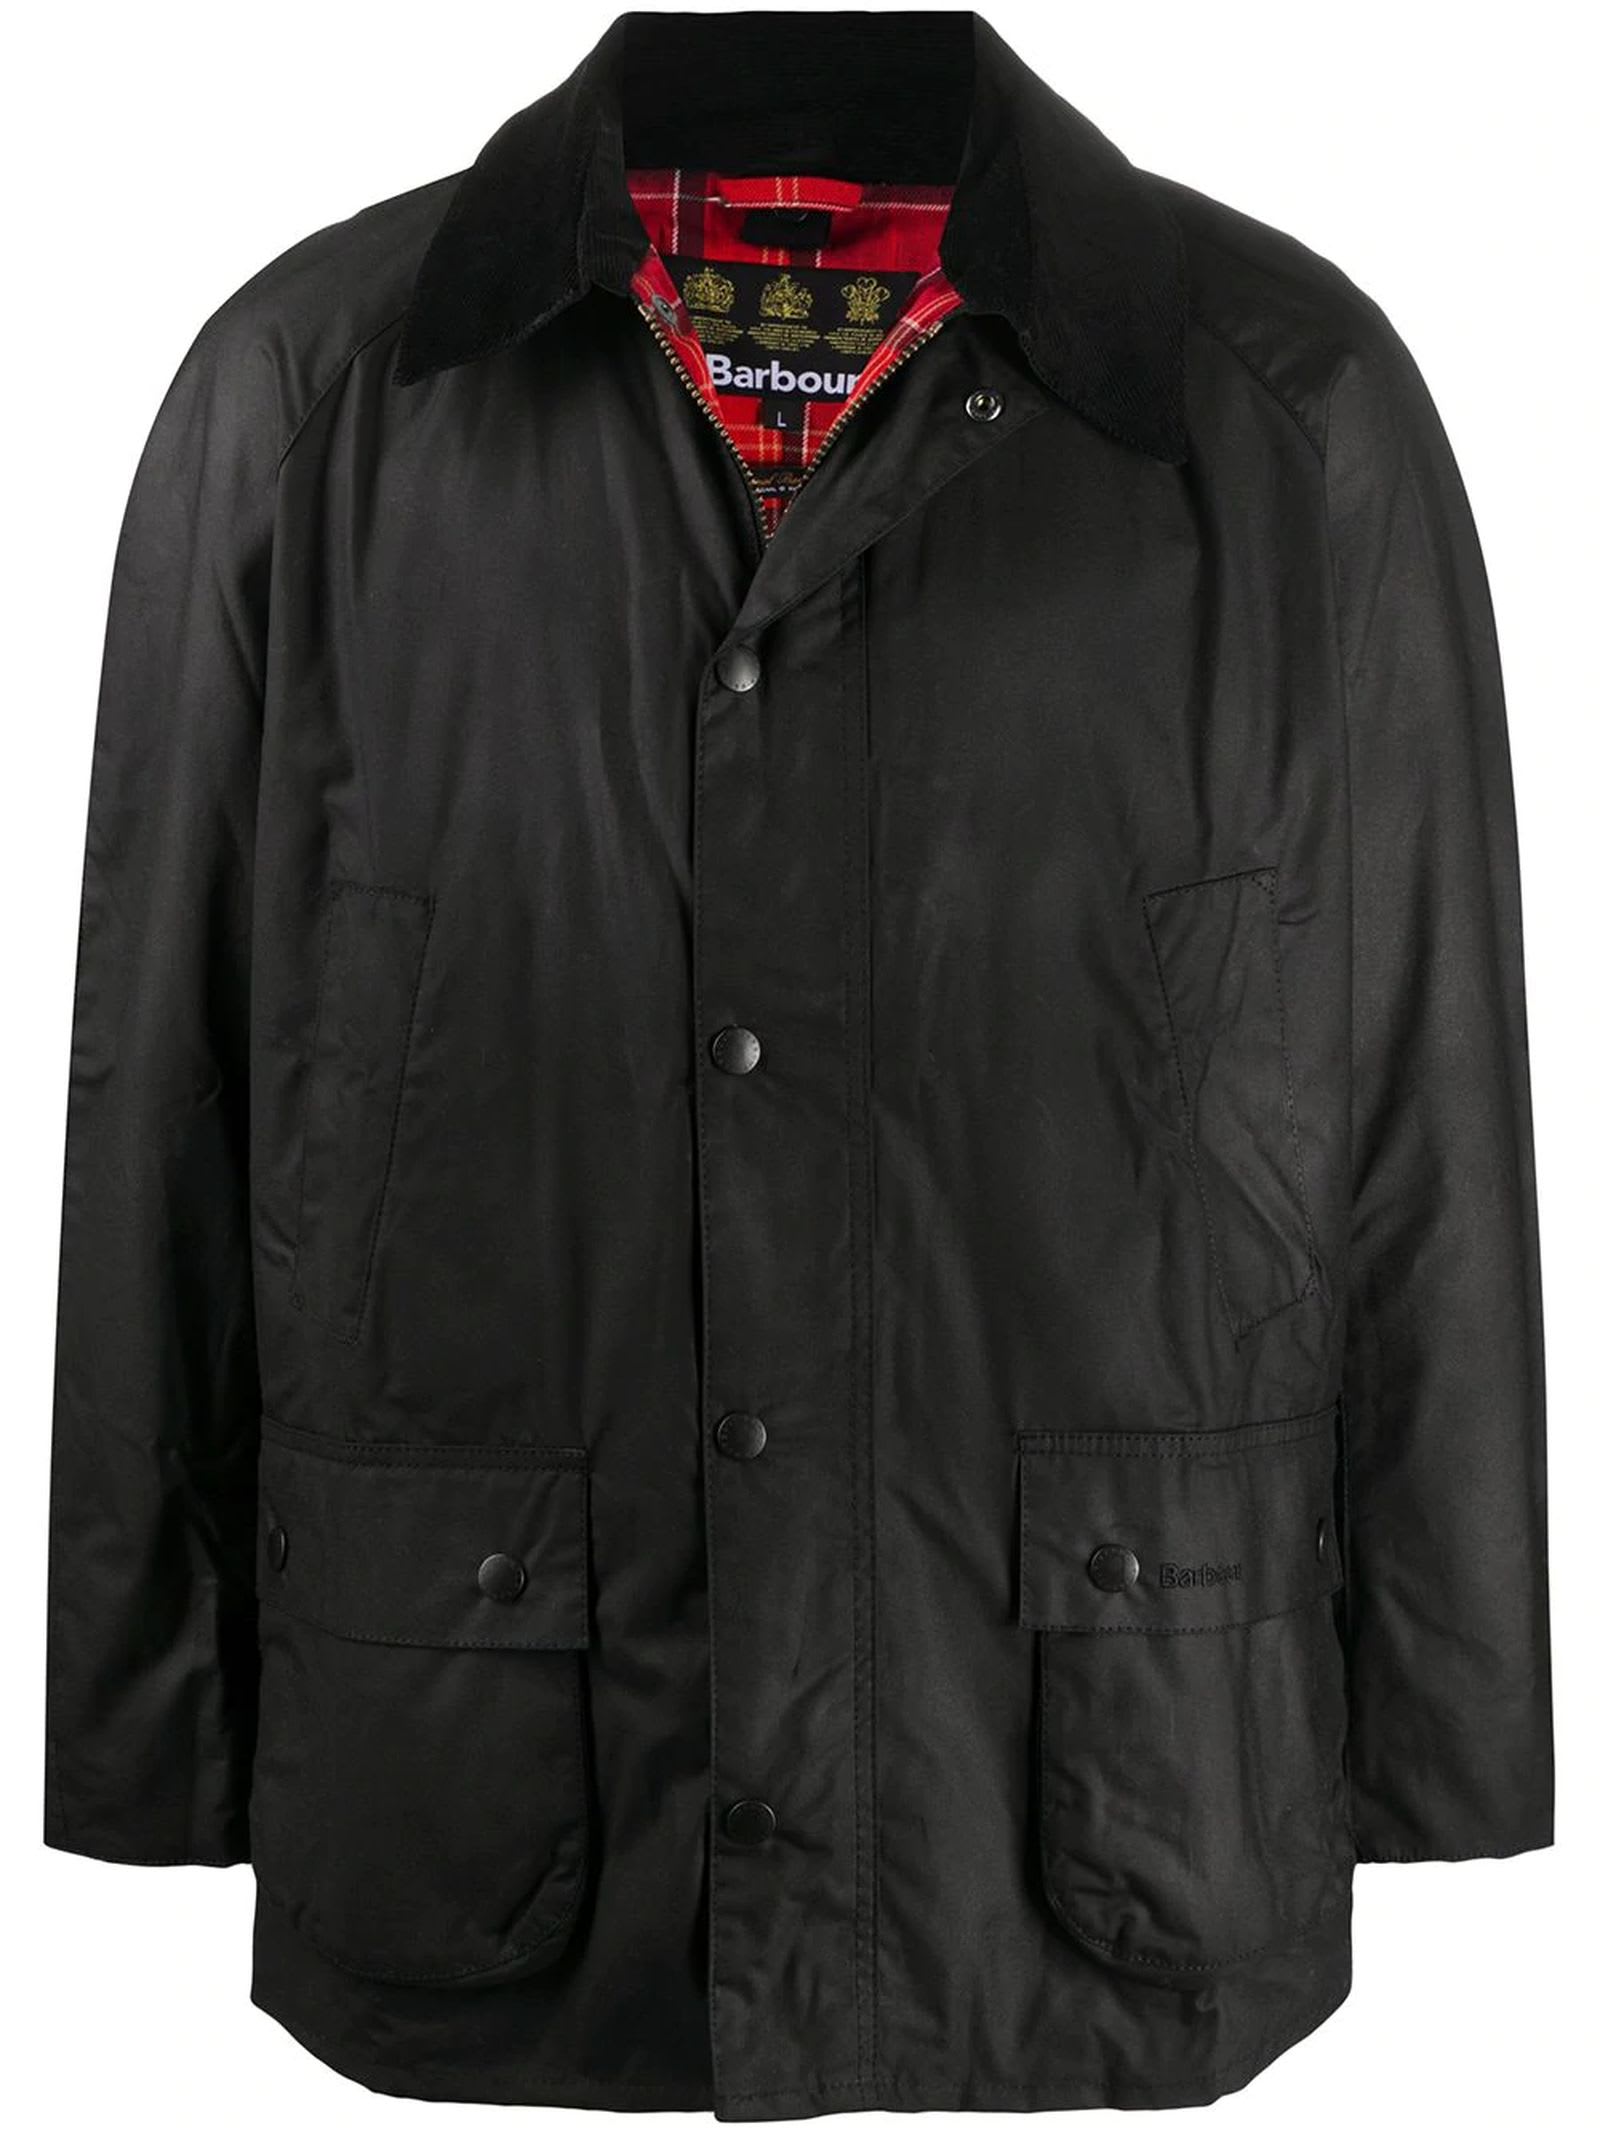 Barbour Black Cotton Ashby Waxed Jacket